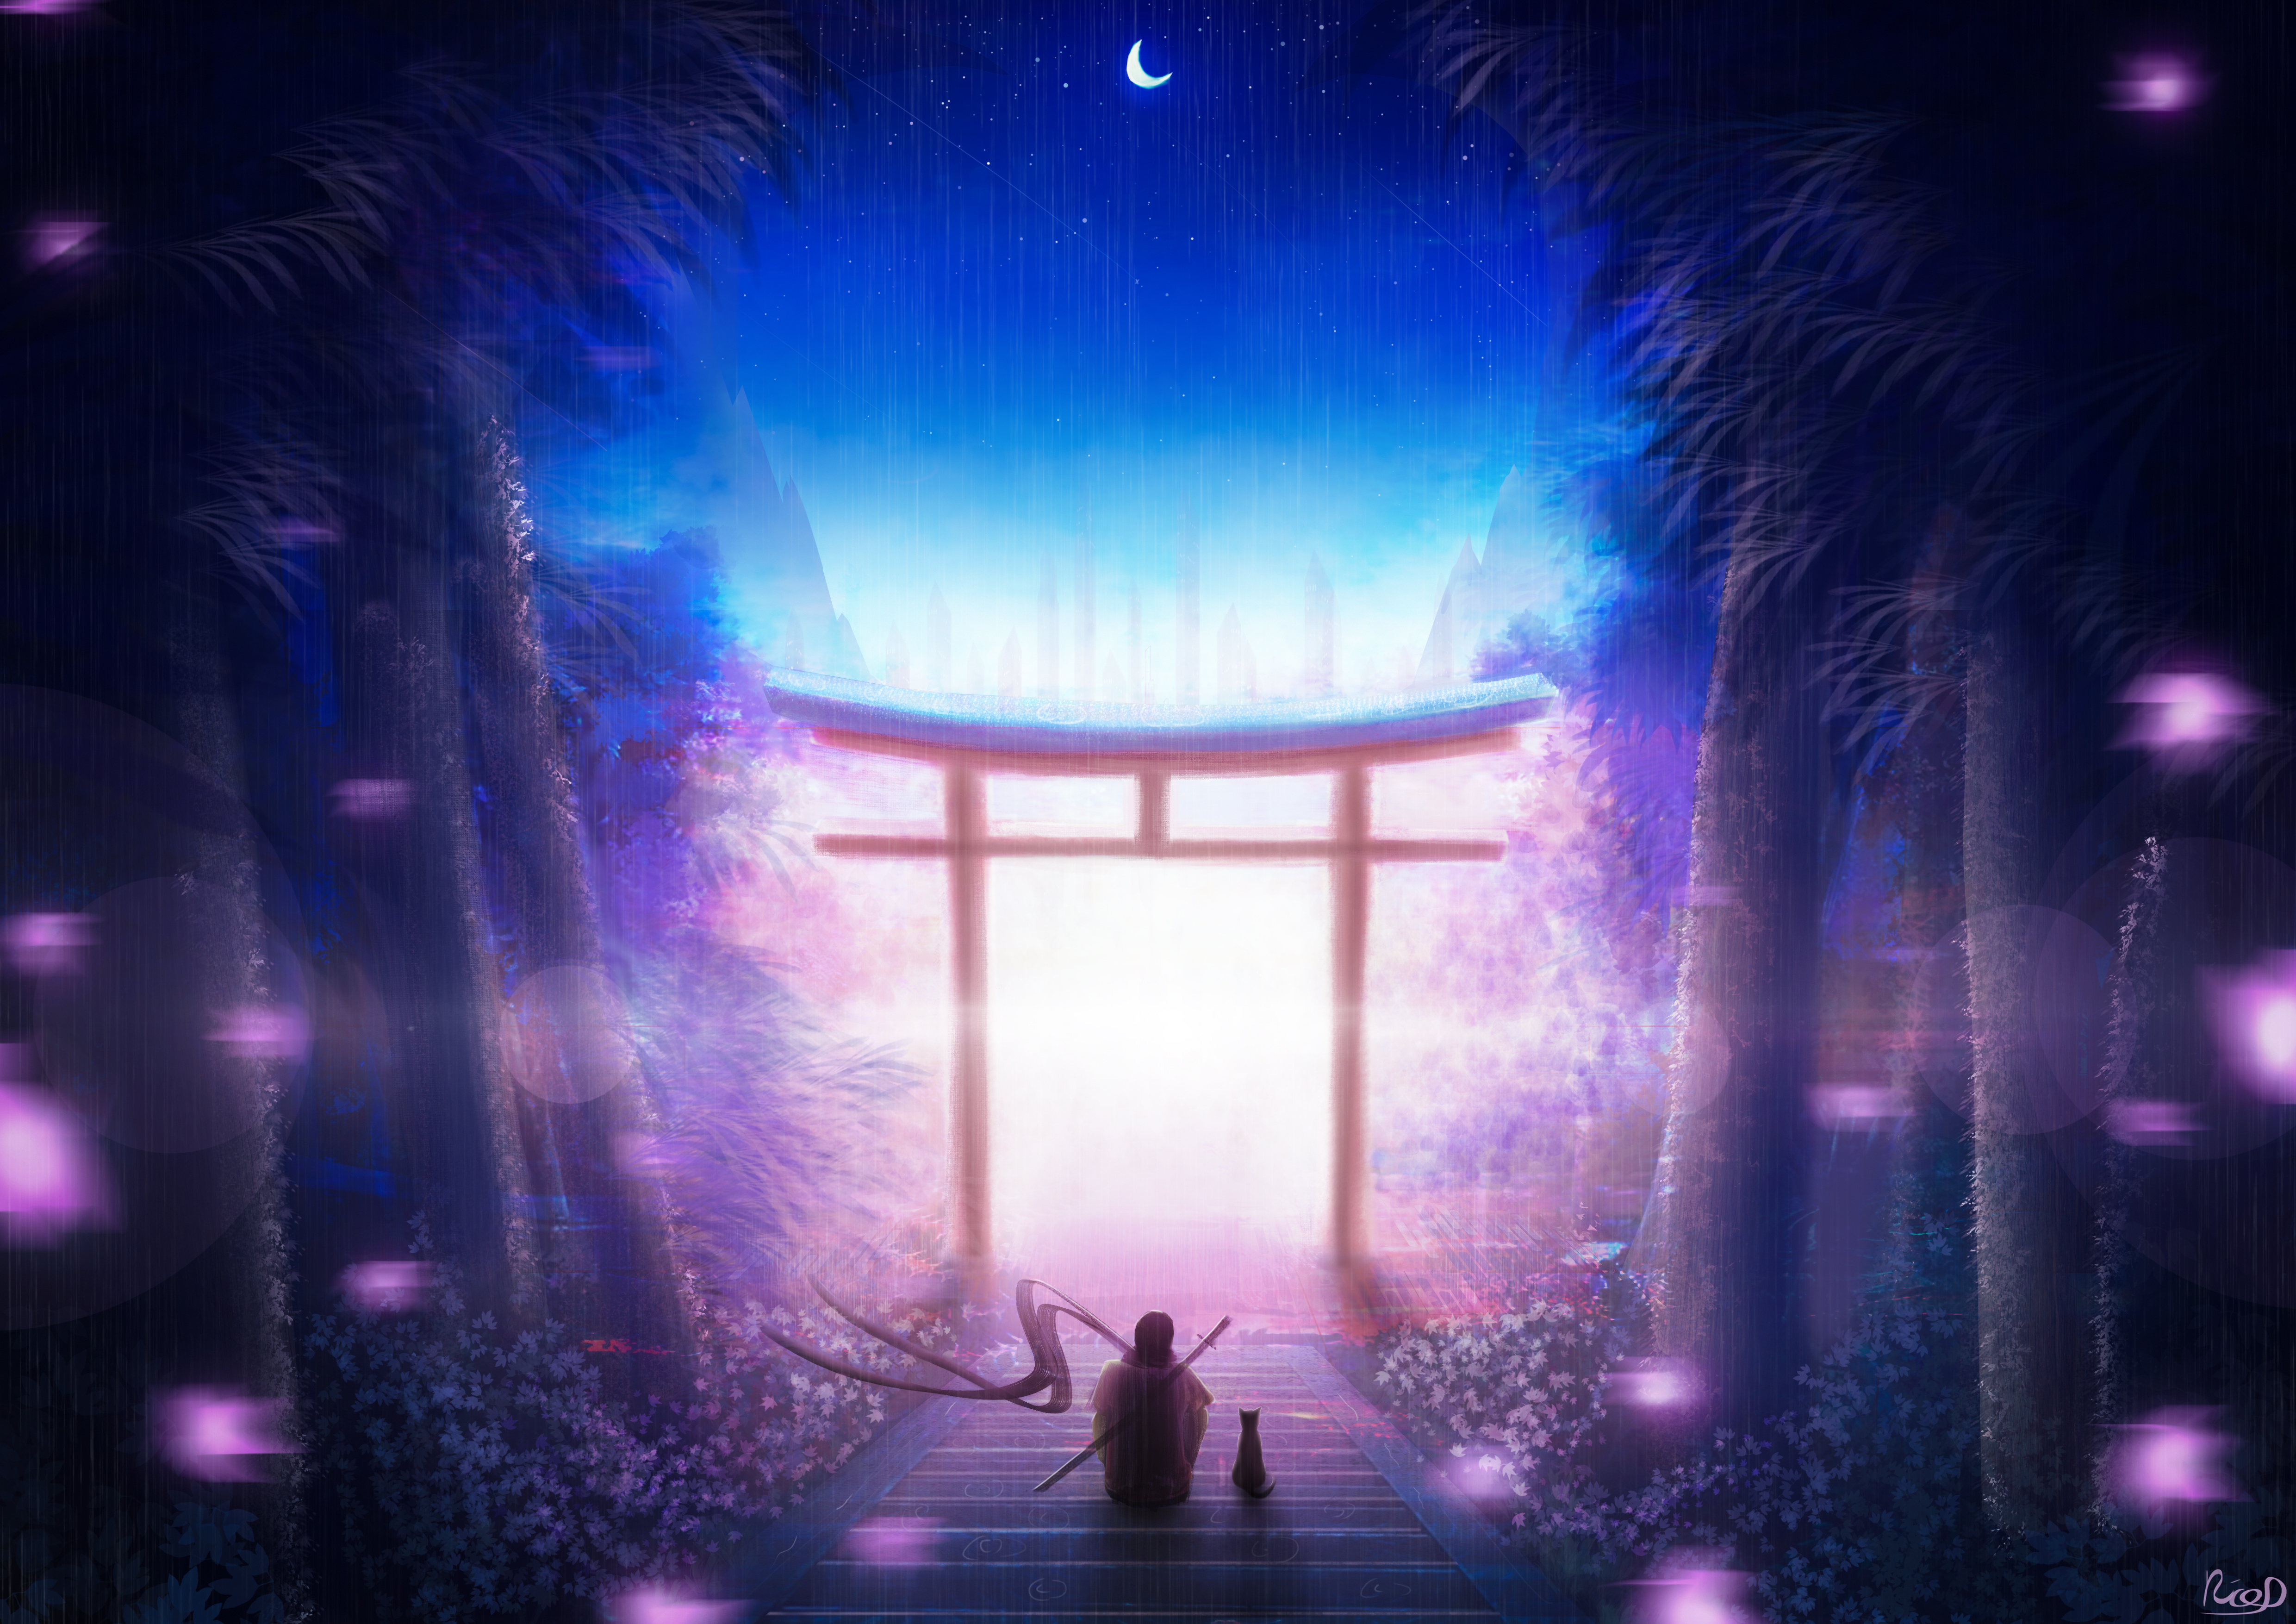 warrior, privacy, art, night, seclusion, torii